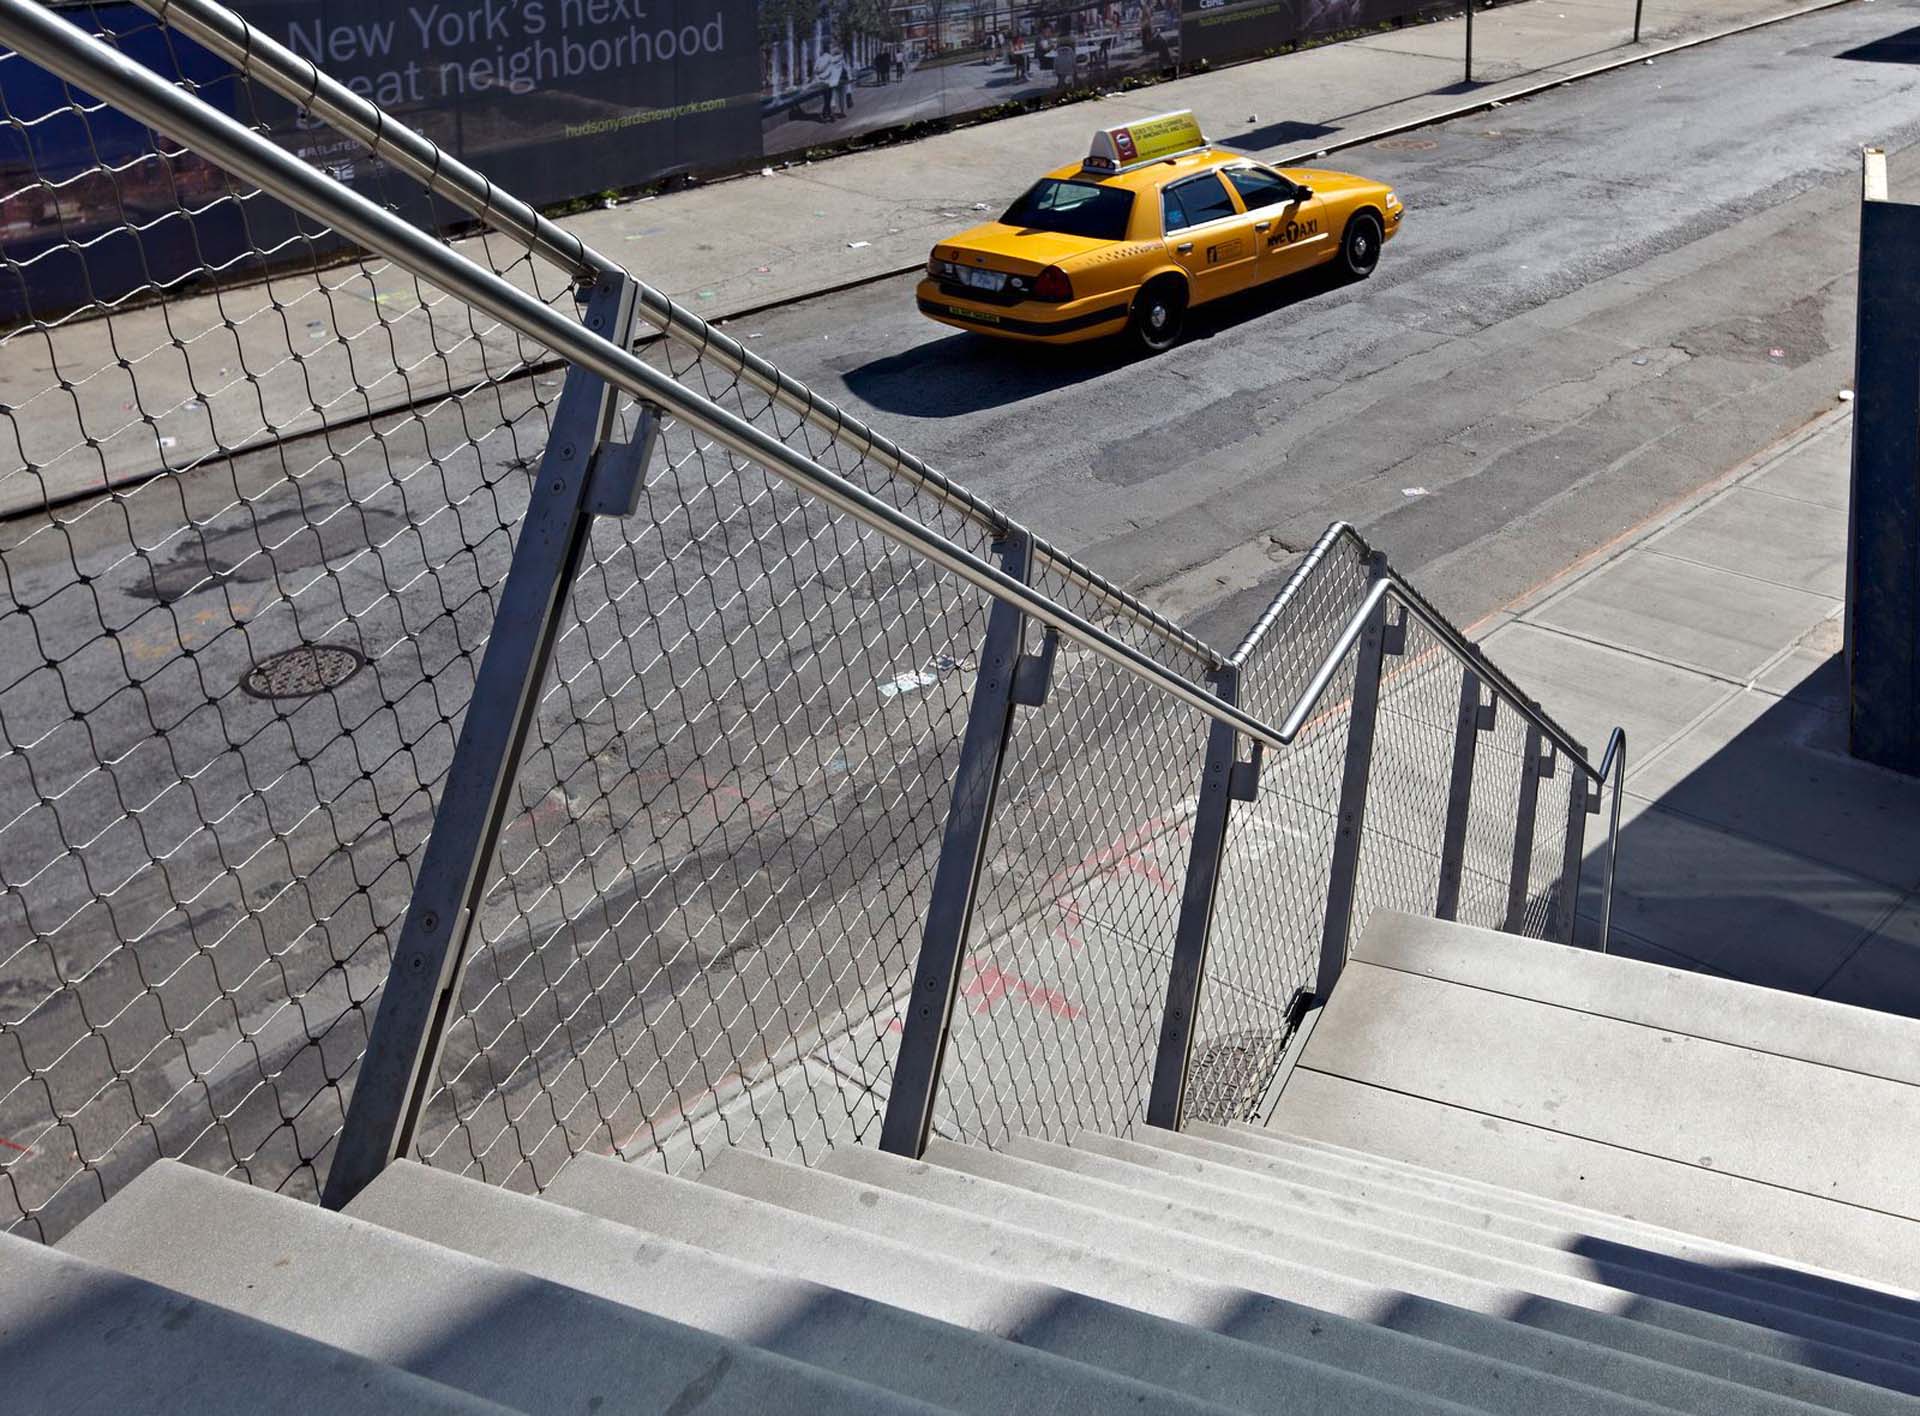 A yellow New York cab in front of a stair with a Webnet railing